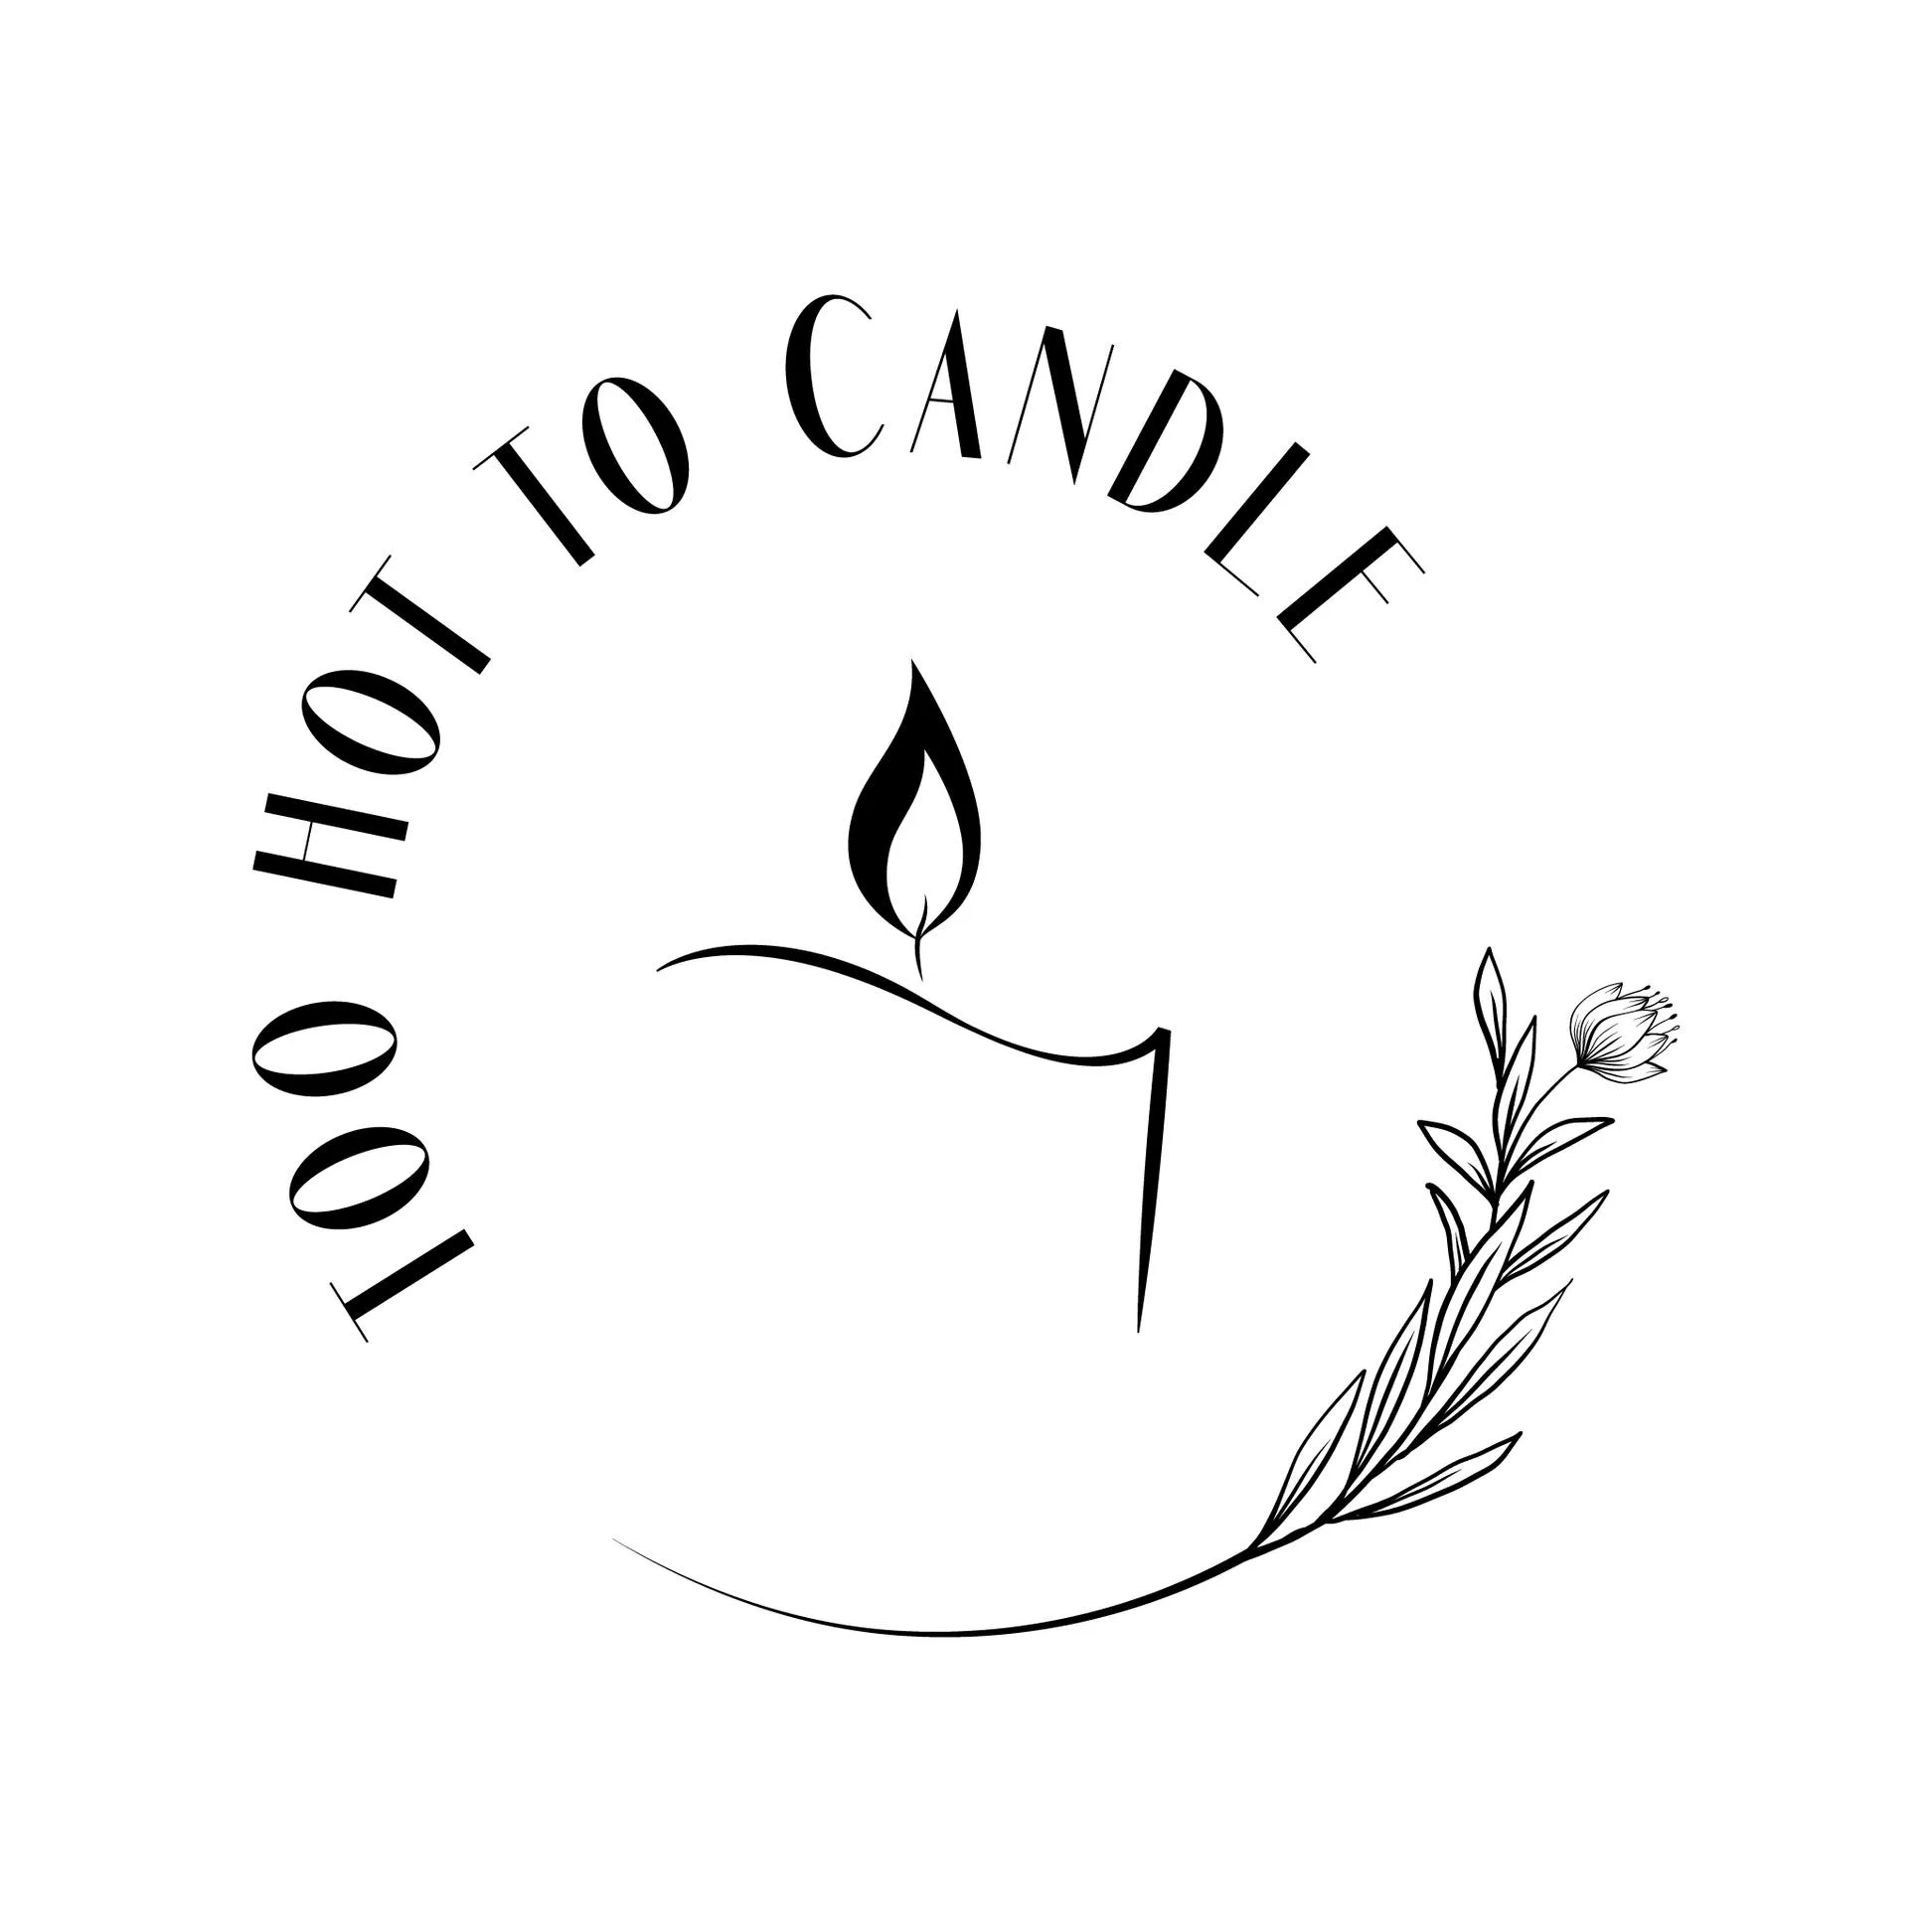 Too Hot To Candle